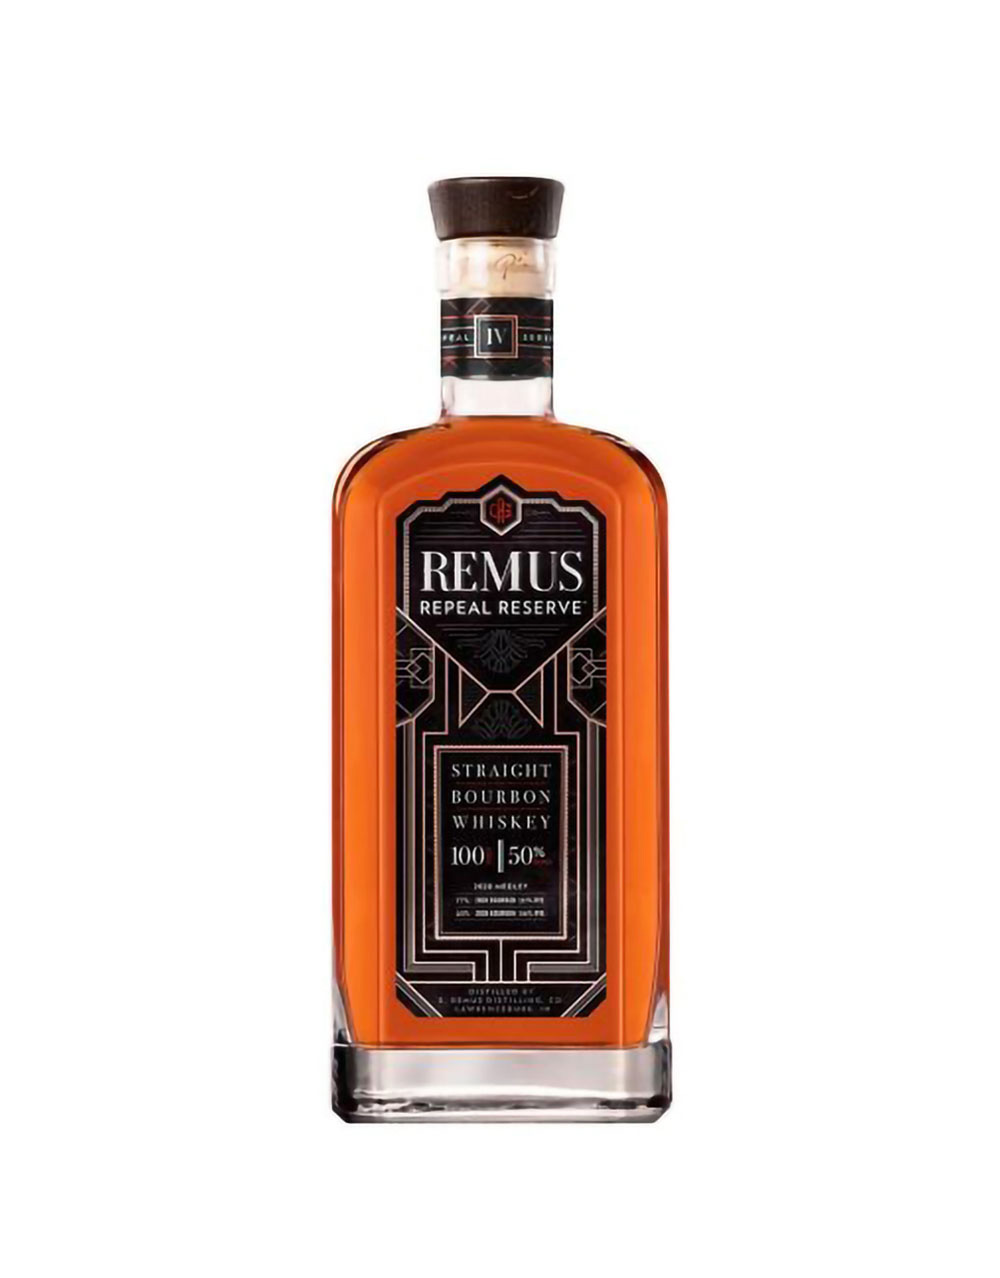 Remus Repeal Reserve Series IV Straight Bourbon Whiskey